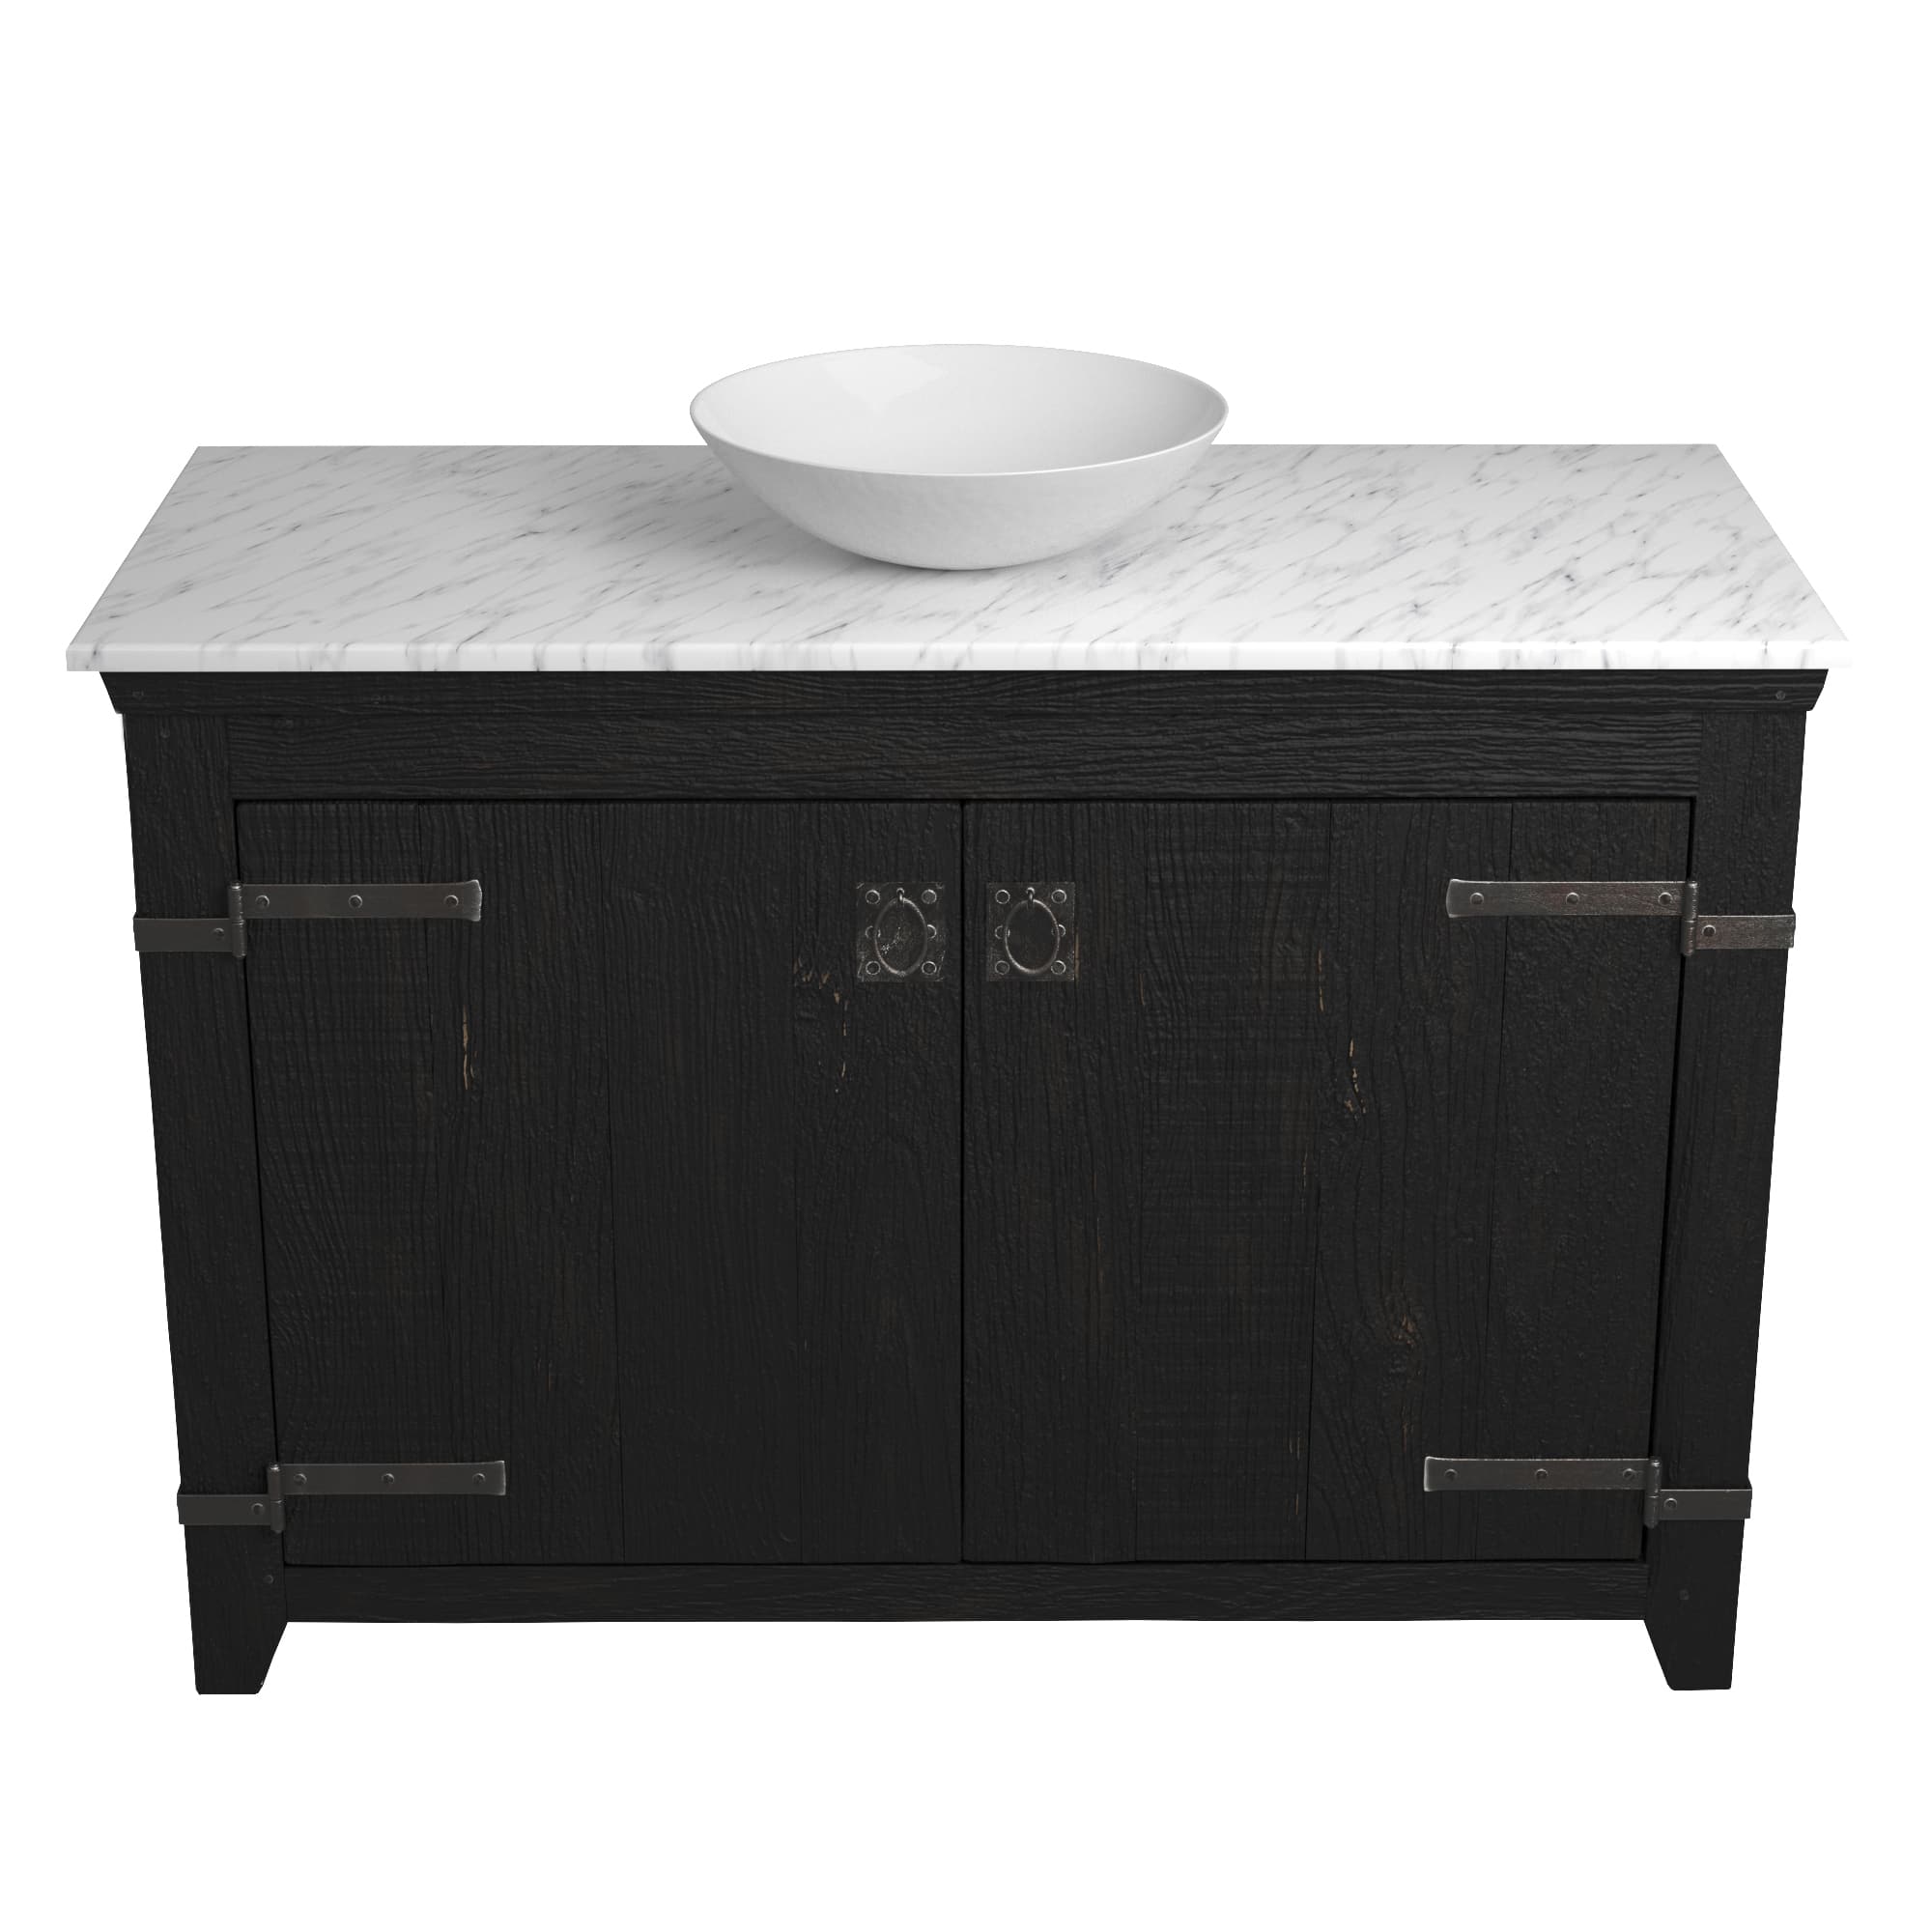 Native Trails 48" Americana Vanity in Anvil with Carrara Marble Top and Verona in Bianco, Single Faucet Hole, BND48-VB-CT-MG-077